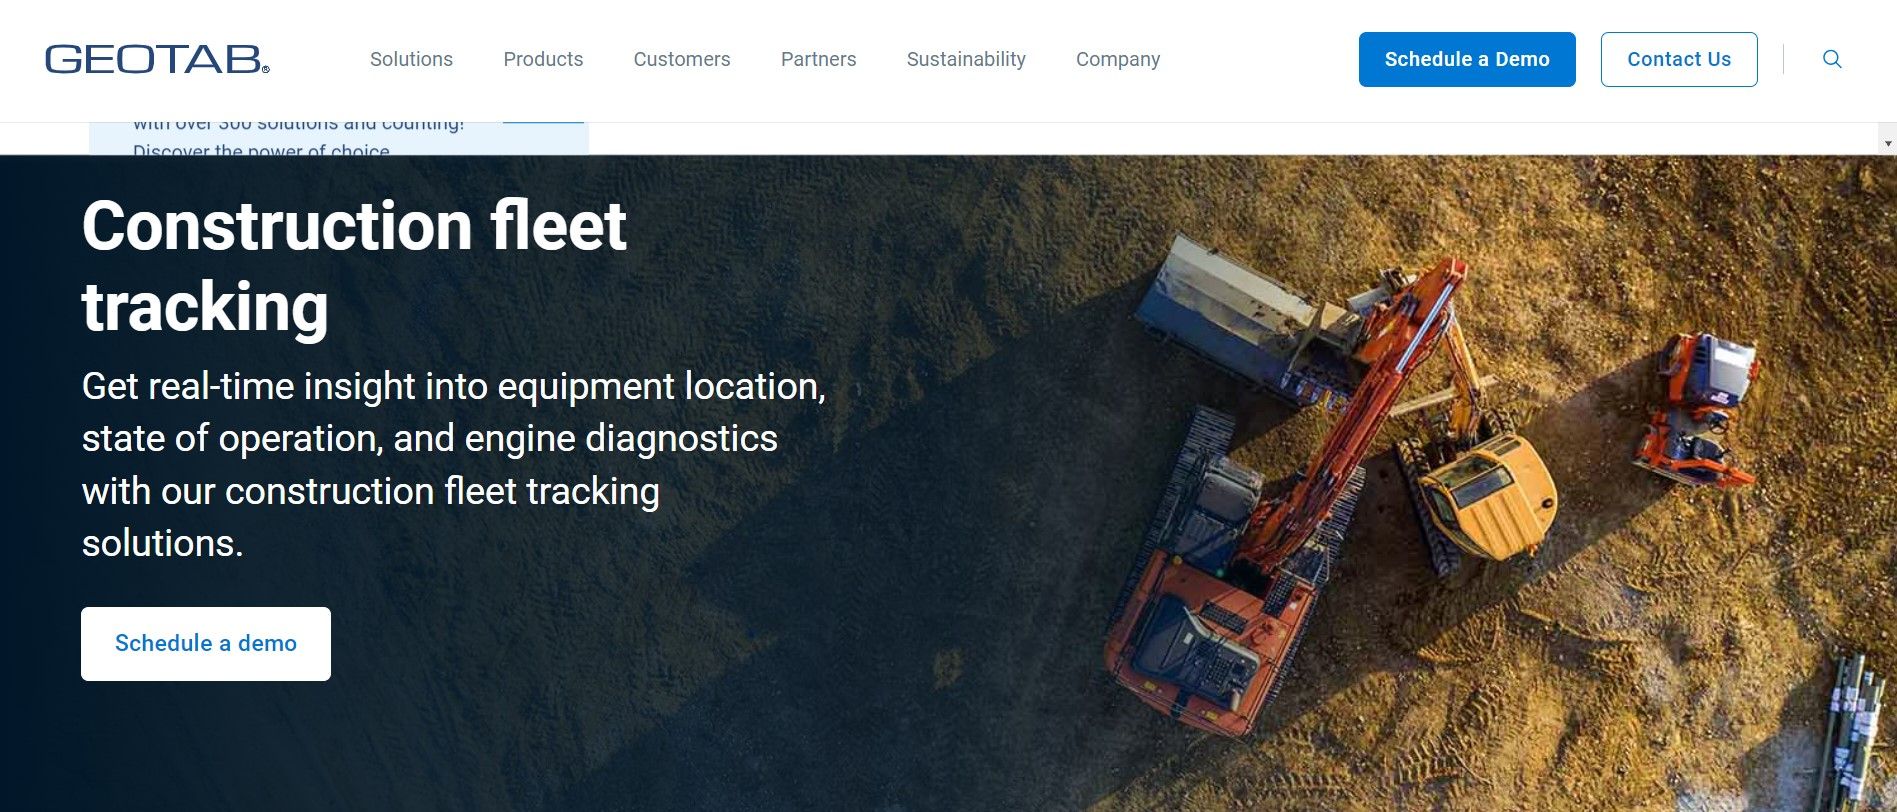 Geotab homepage showing construction vehicles and mentioning 'construction fleet tracking'